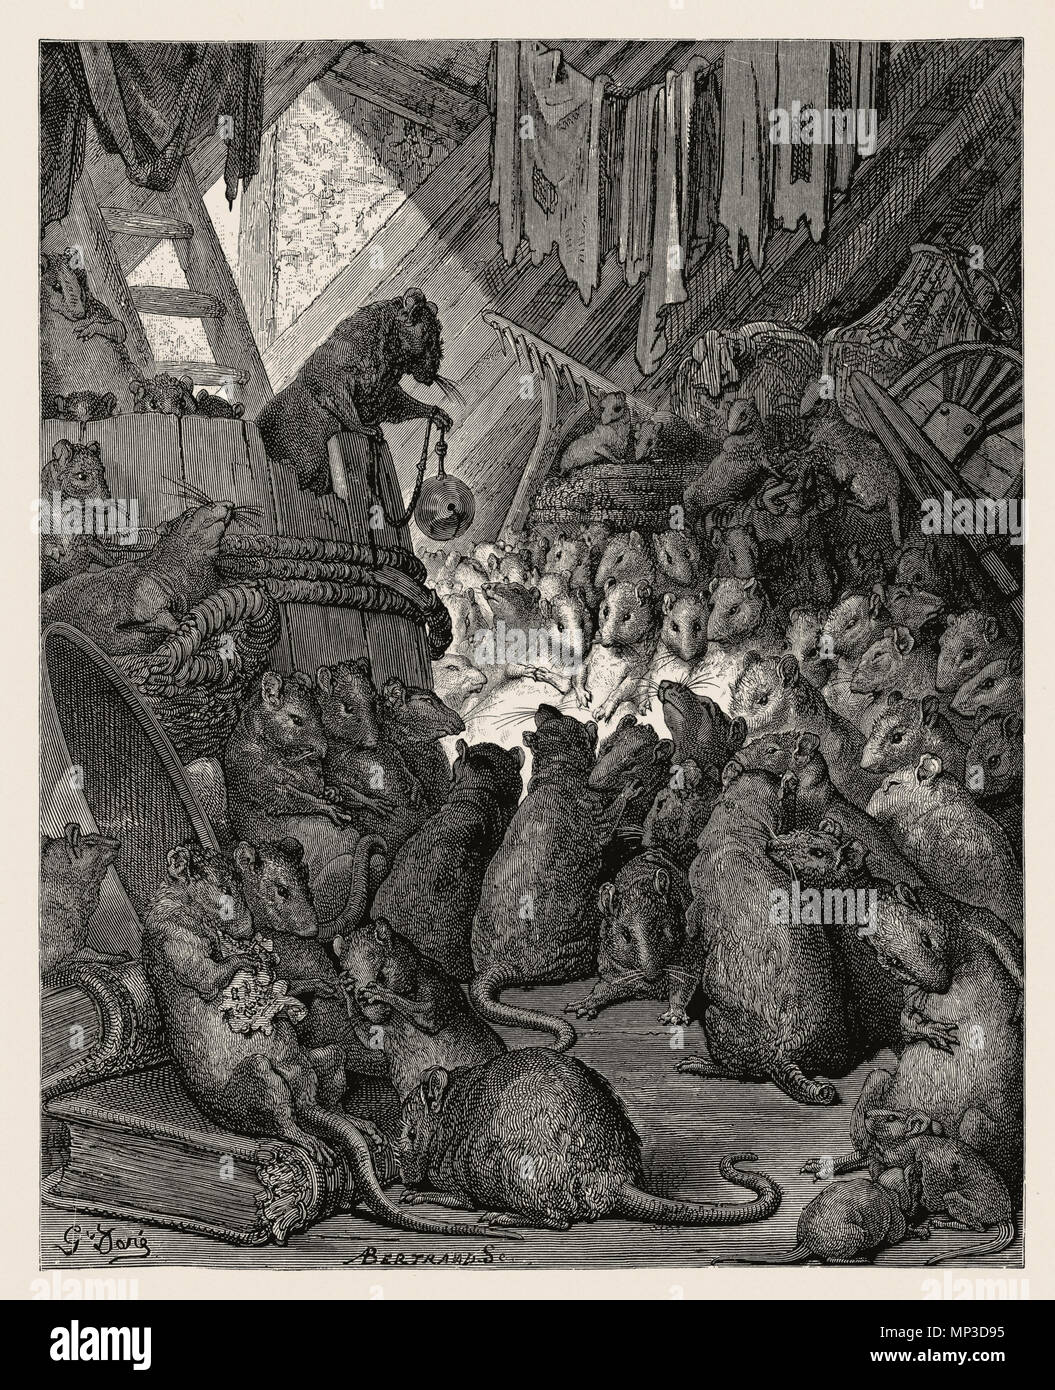 . English: Scan of a Gustave Doré engraving .   Gustave Doré  (1832–1883)      Alternative names Paul Gustave Doré, Paul Gustave Louis Christophe Doré  Description French painter, illustrator, engraver and caricaturist  Date of birth/death 6 January 1832 23 January 1883  Location of birth/death Strasbourg Paris  Work location Paris  Authority control  : Q6682 VIAF: 41839207 ISNI: 0000 0001 2278 6962 ULAN: 500013657 LCCN: n79089221 NLA: 35041510 WorldCat 1171 The council of the rats Stock Photo